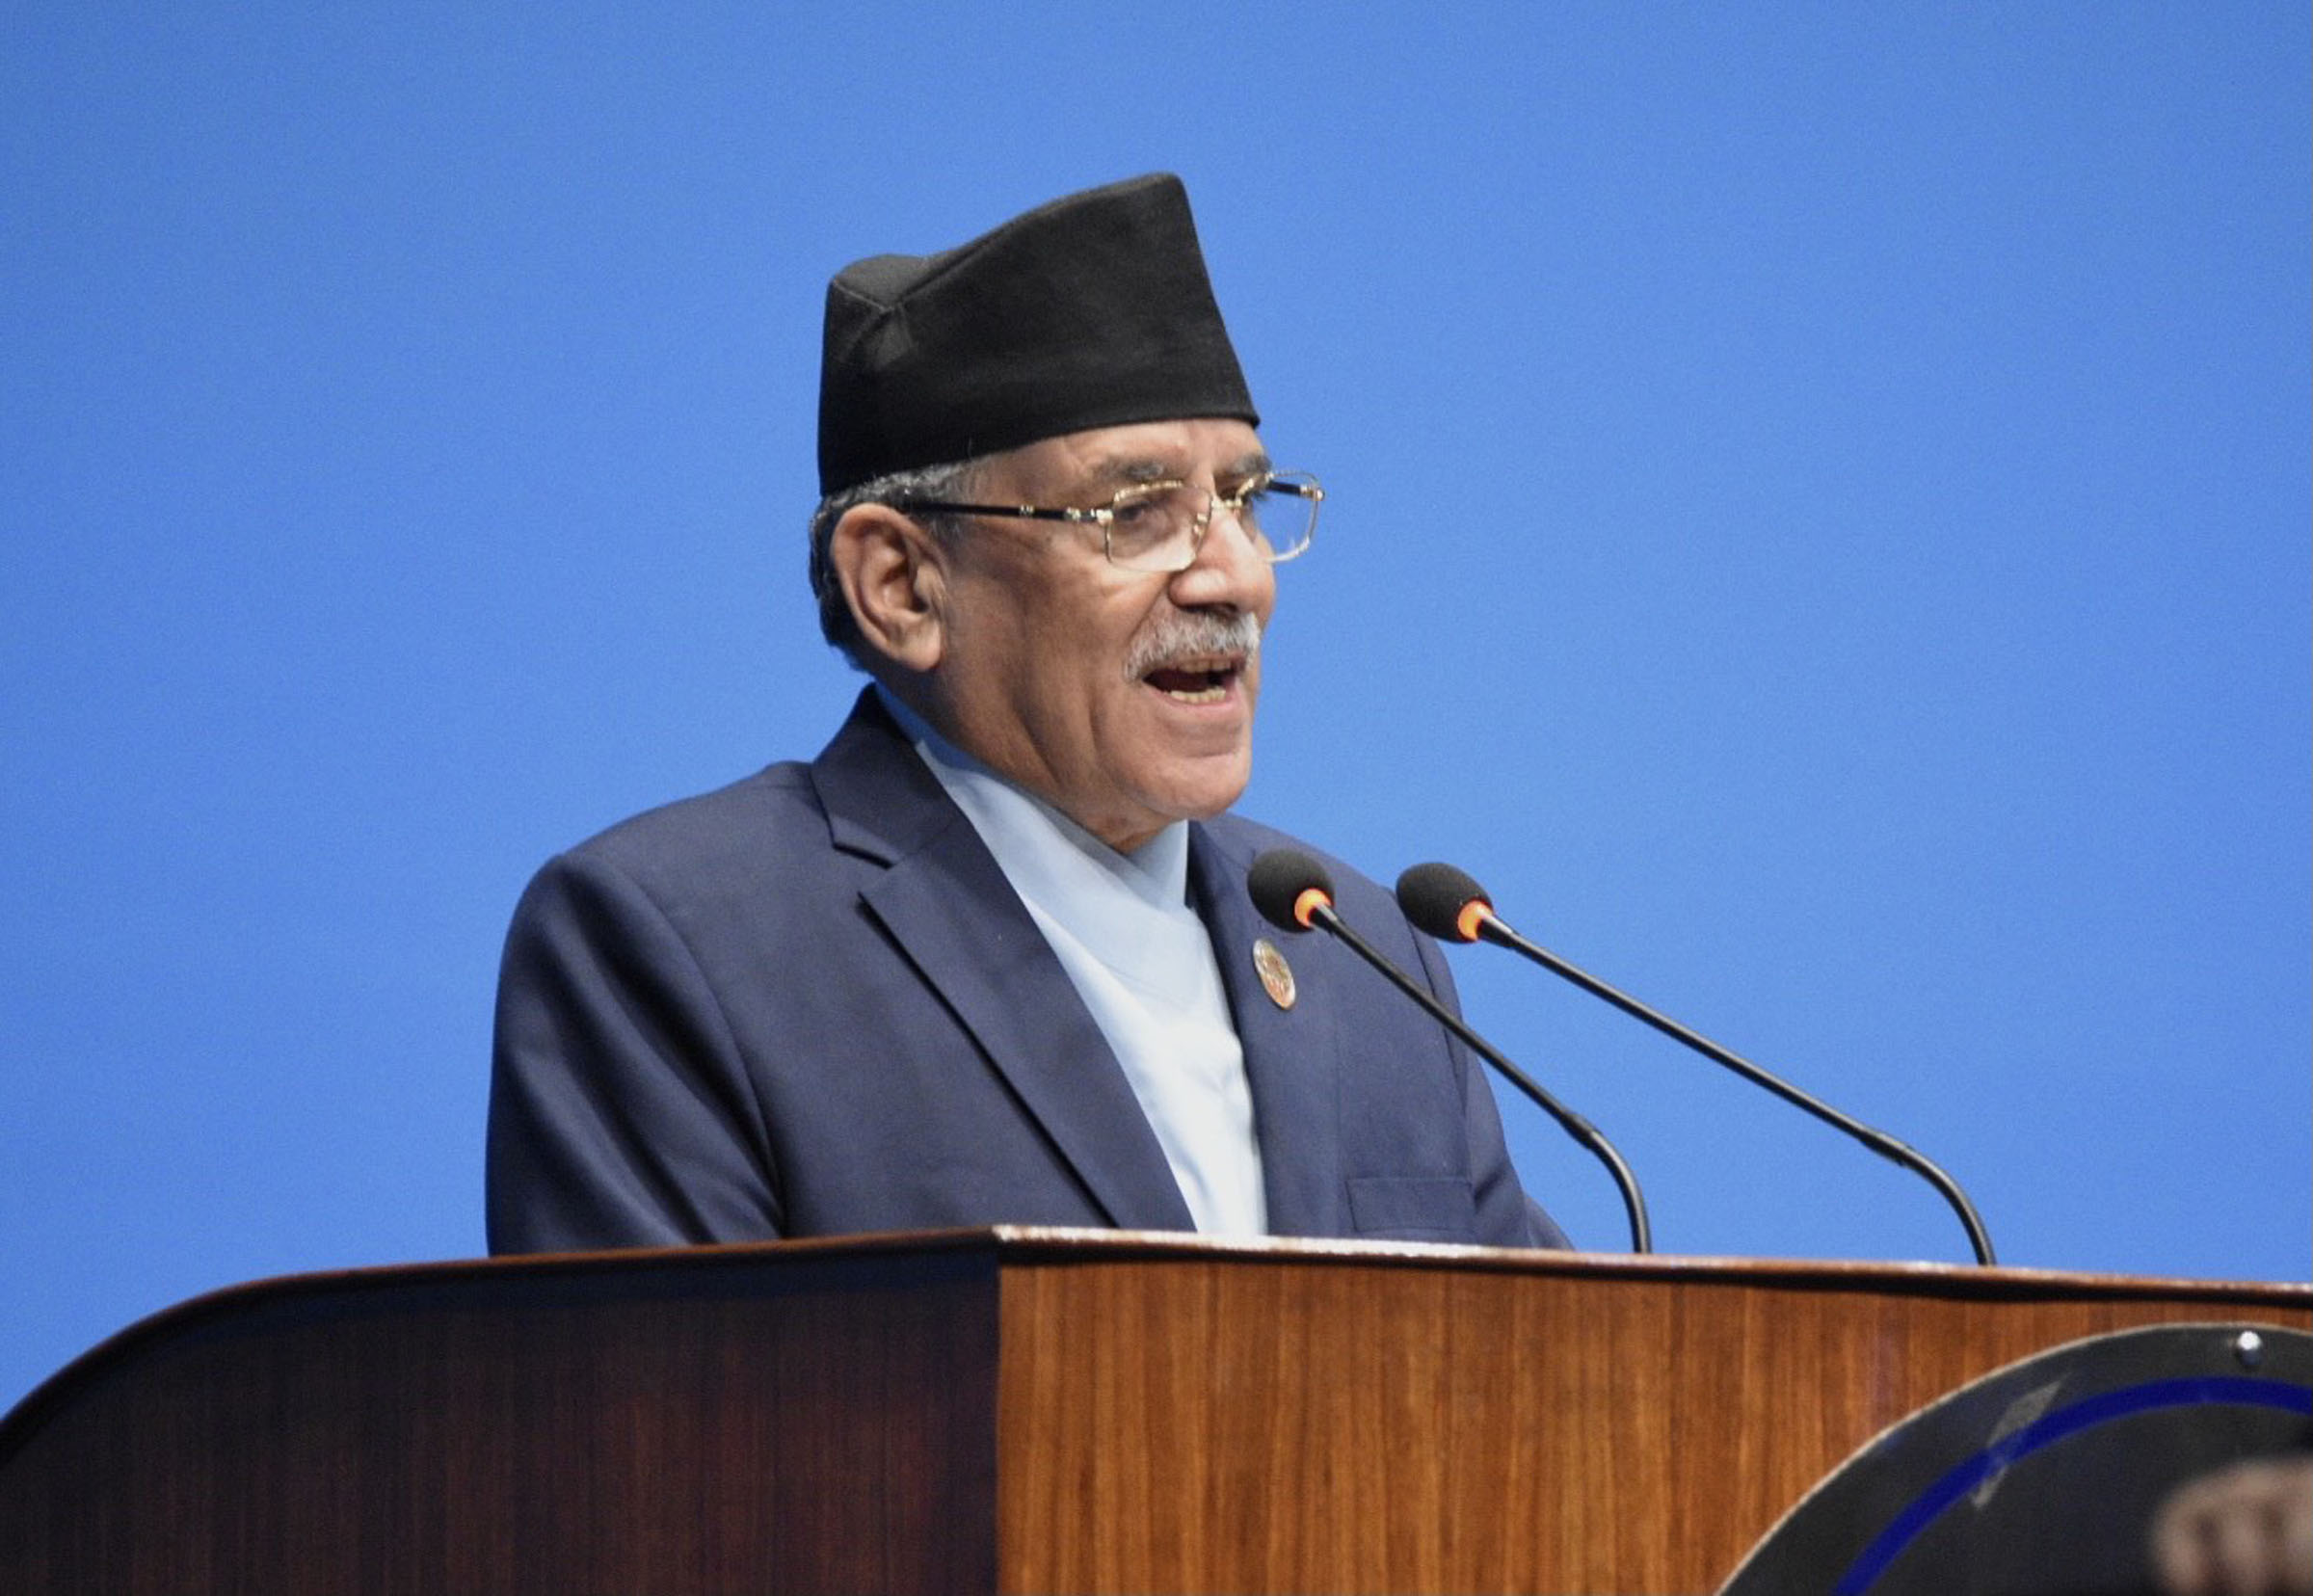 Development of democracy possible within a democracy: PM Dahal